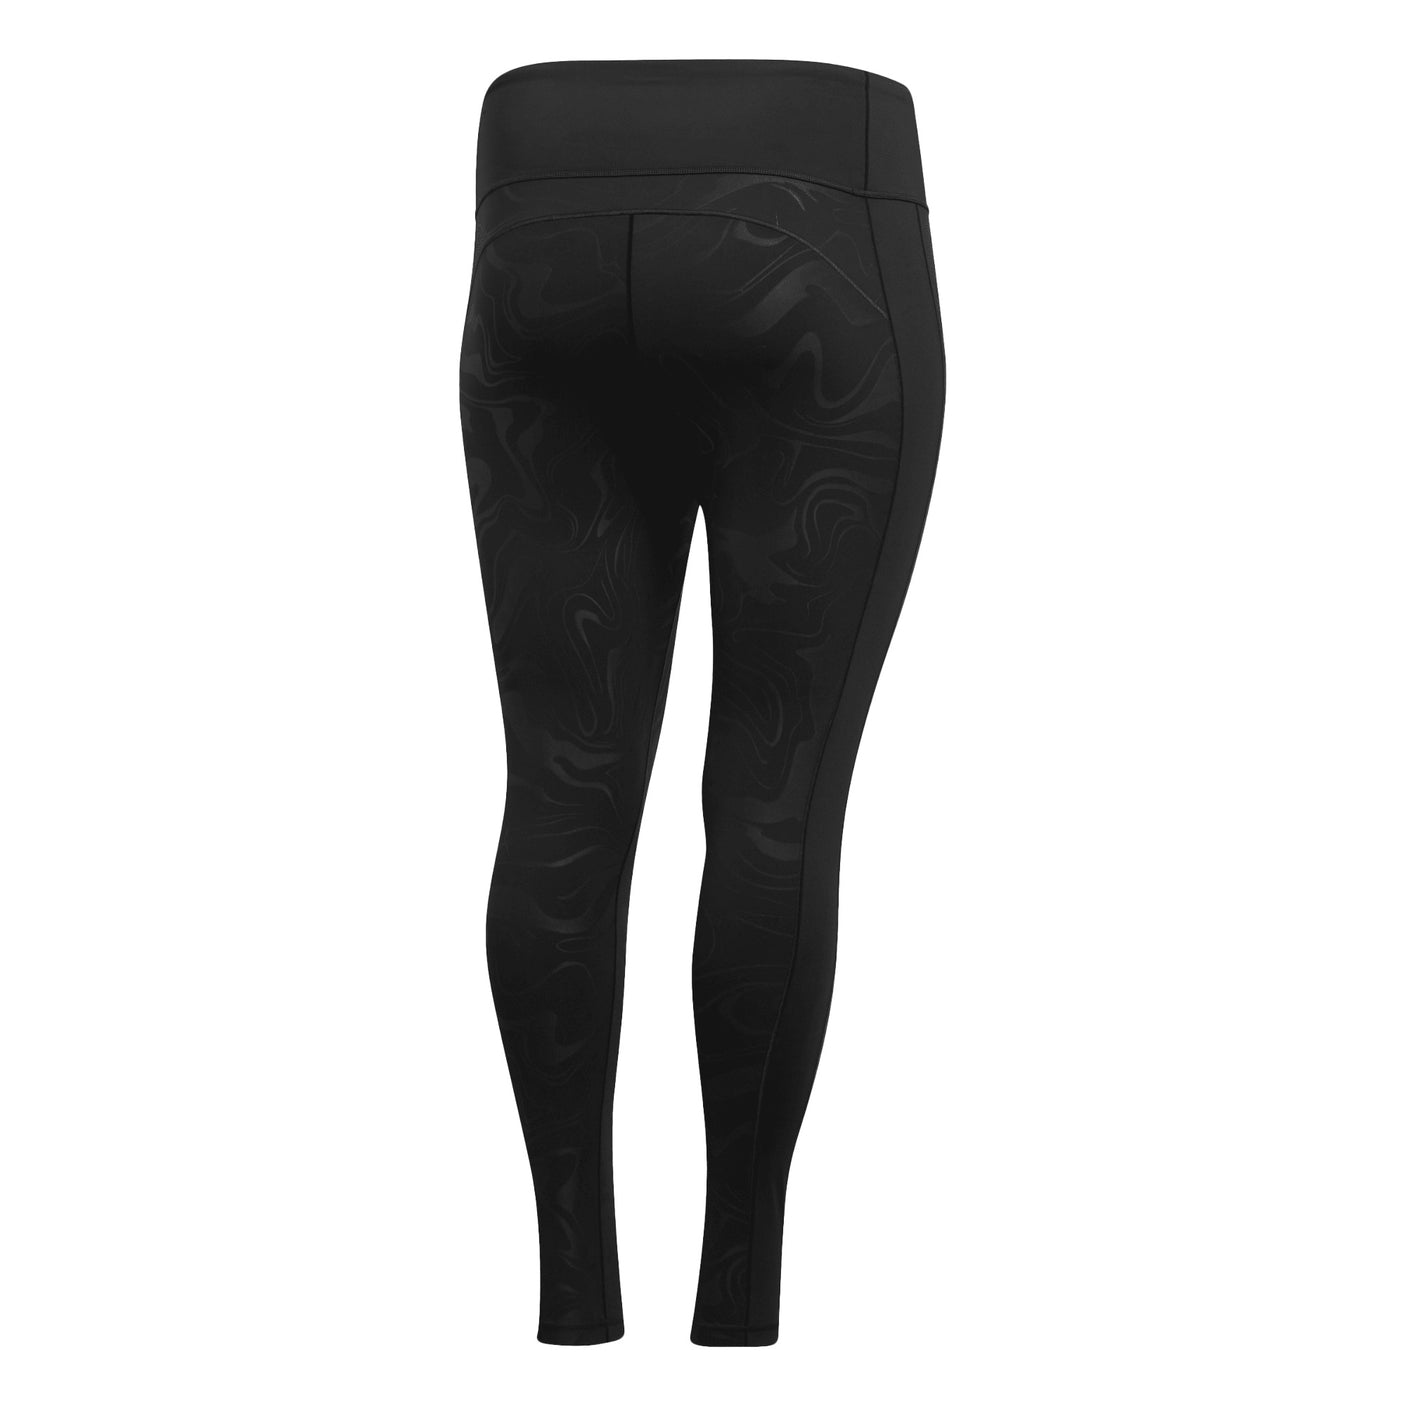 adidas Women's Believe This Glam On Long Tights (Plus Size) Black